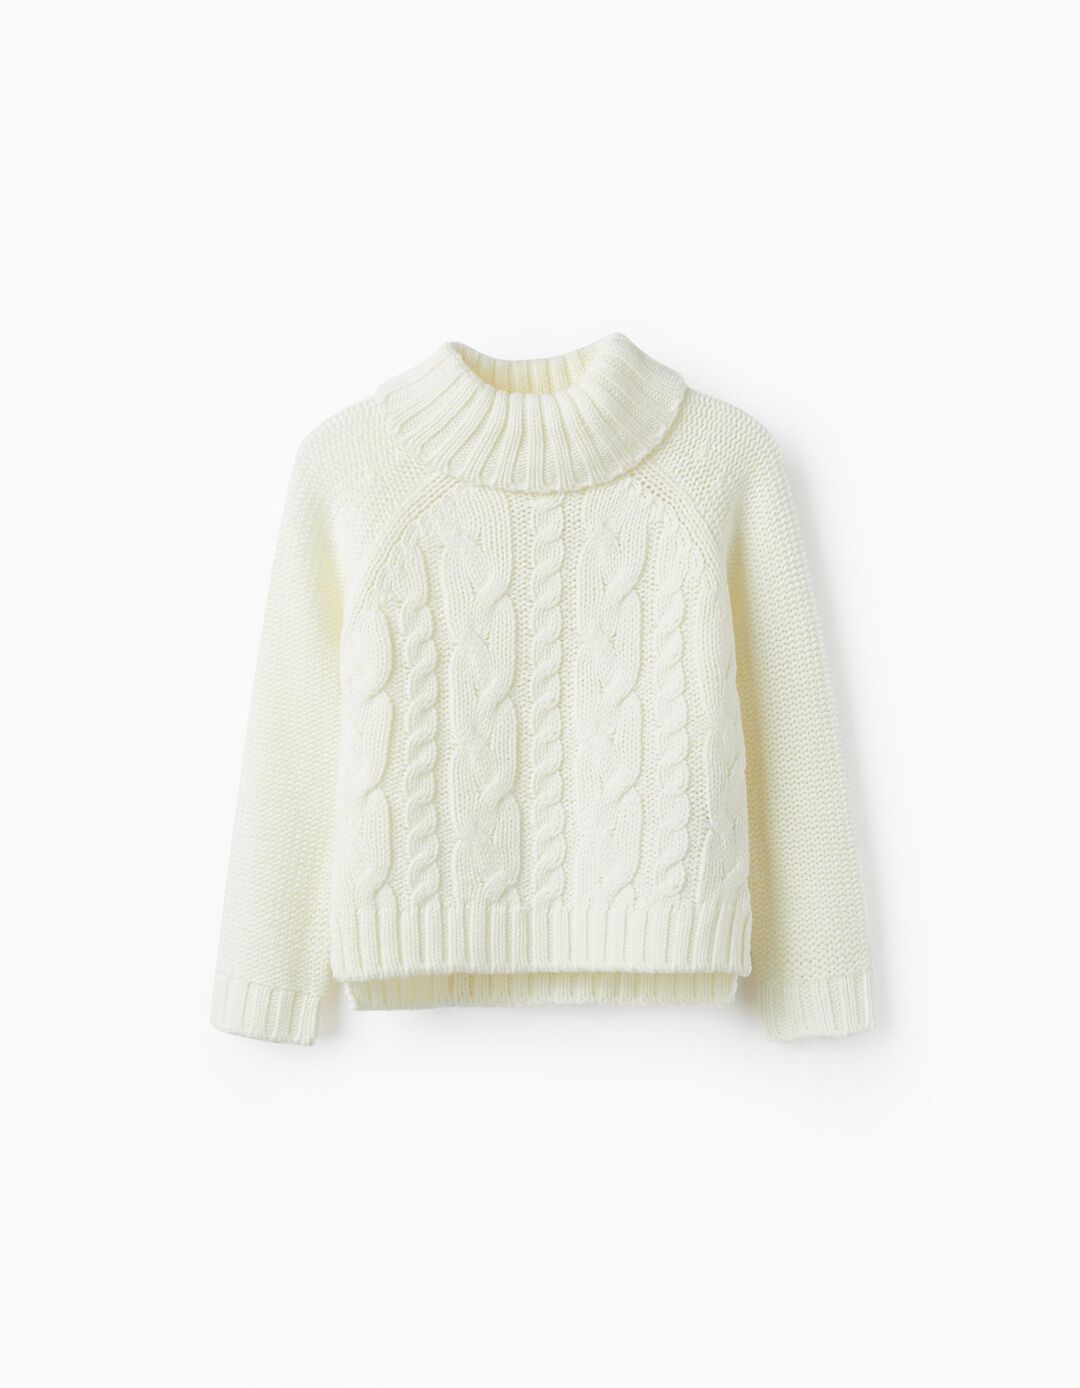 High Neck Knitted Sweater for Girls, White